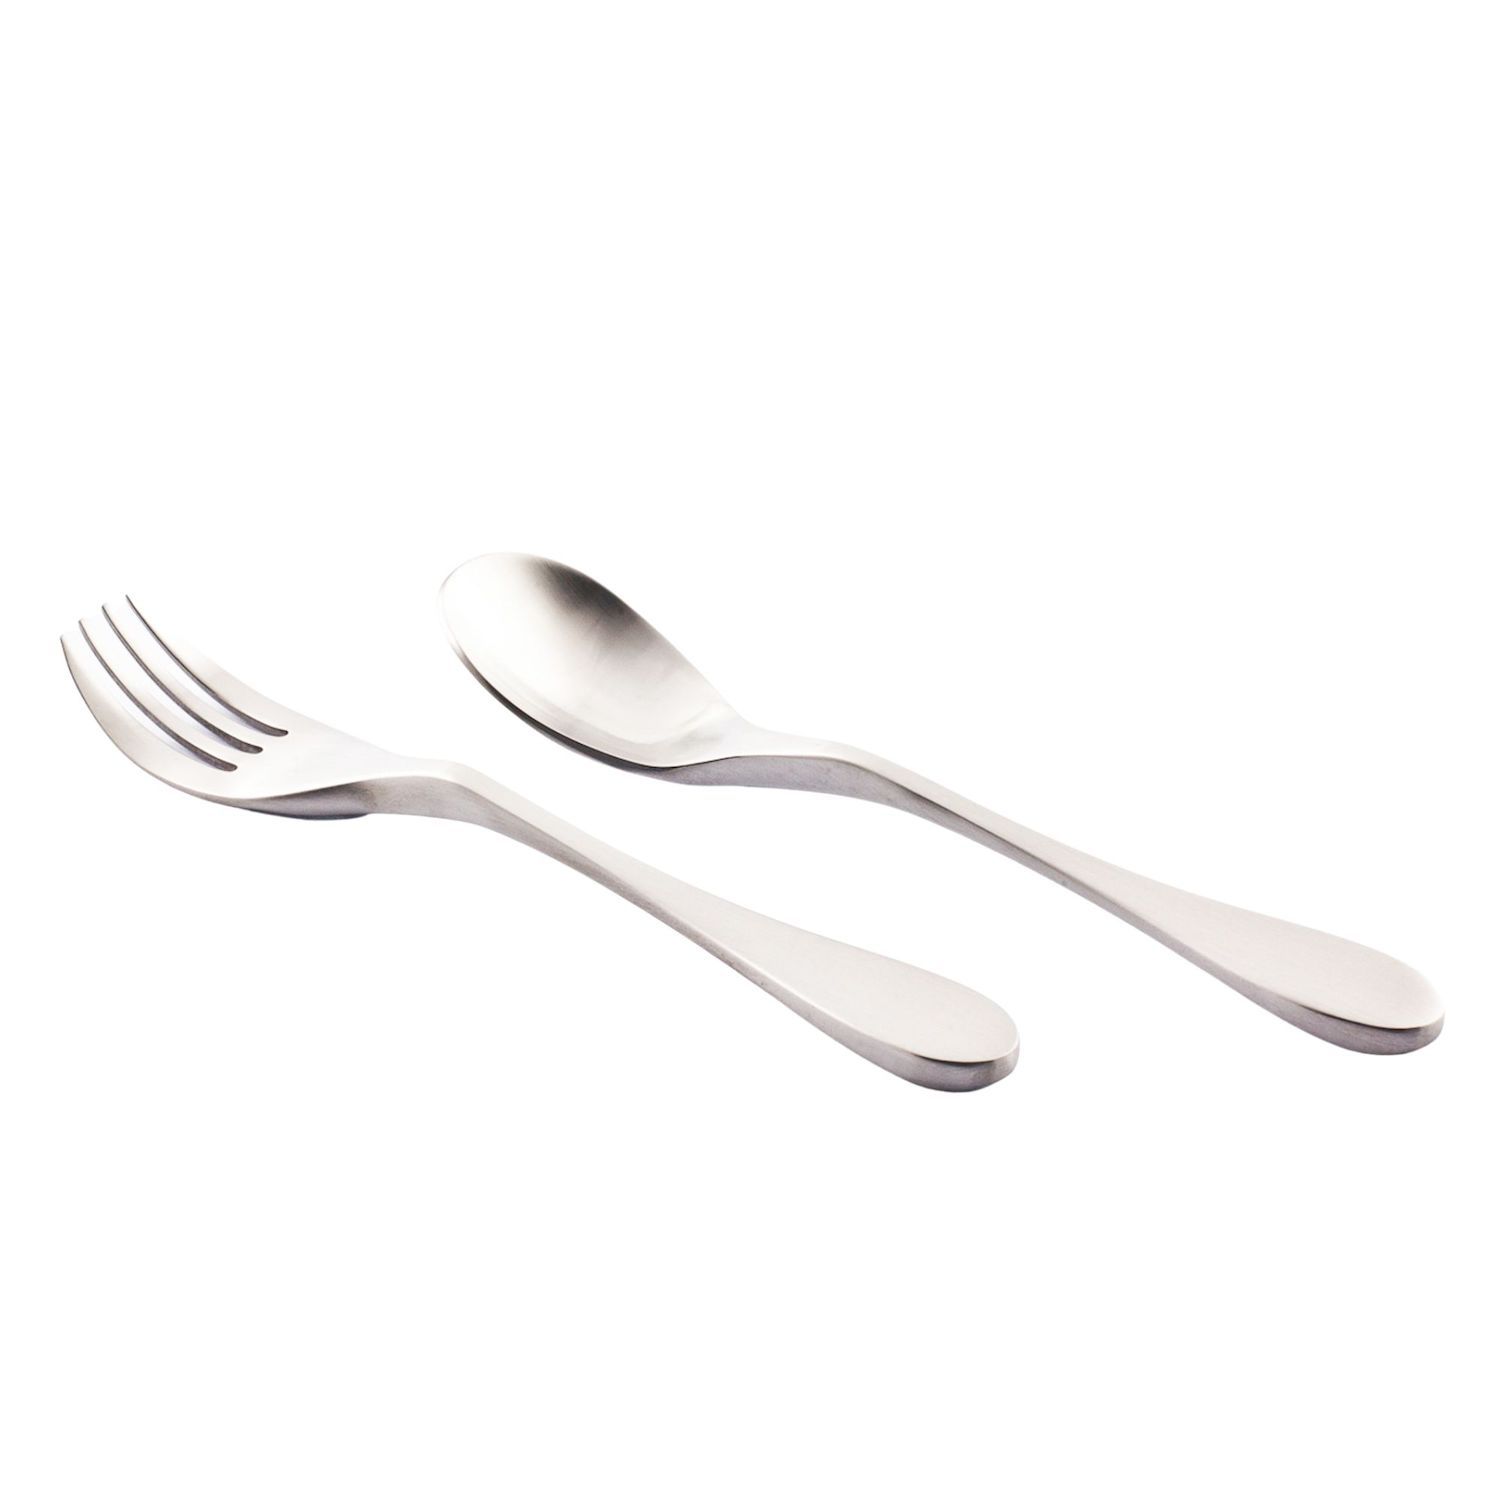 Zulay Kitchen Kids Cutlery Set Designed For Self Feeding - Spoon & Fork